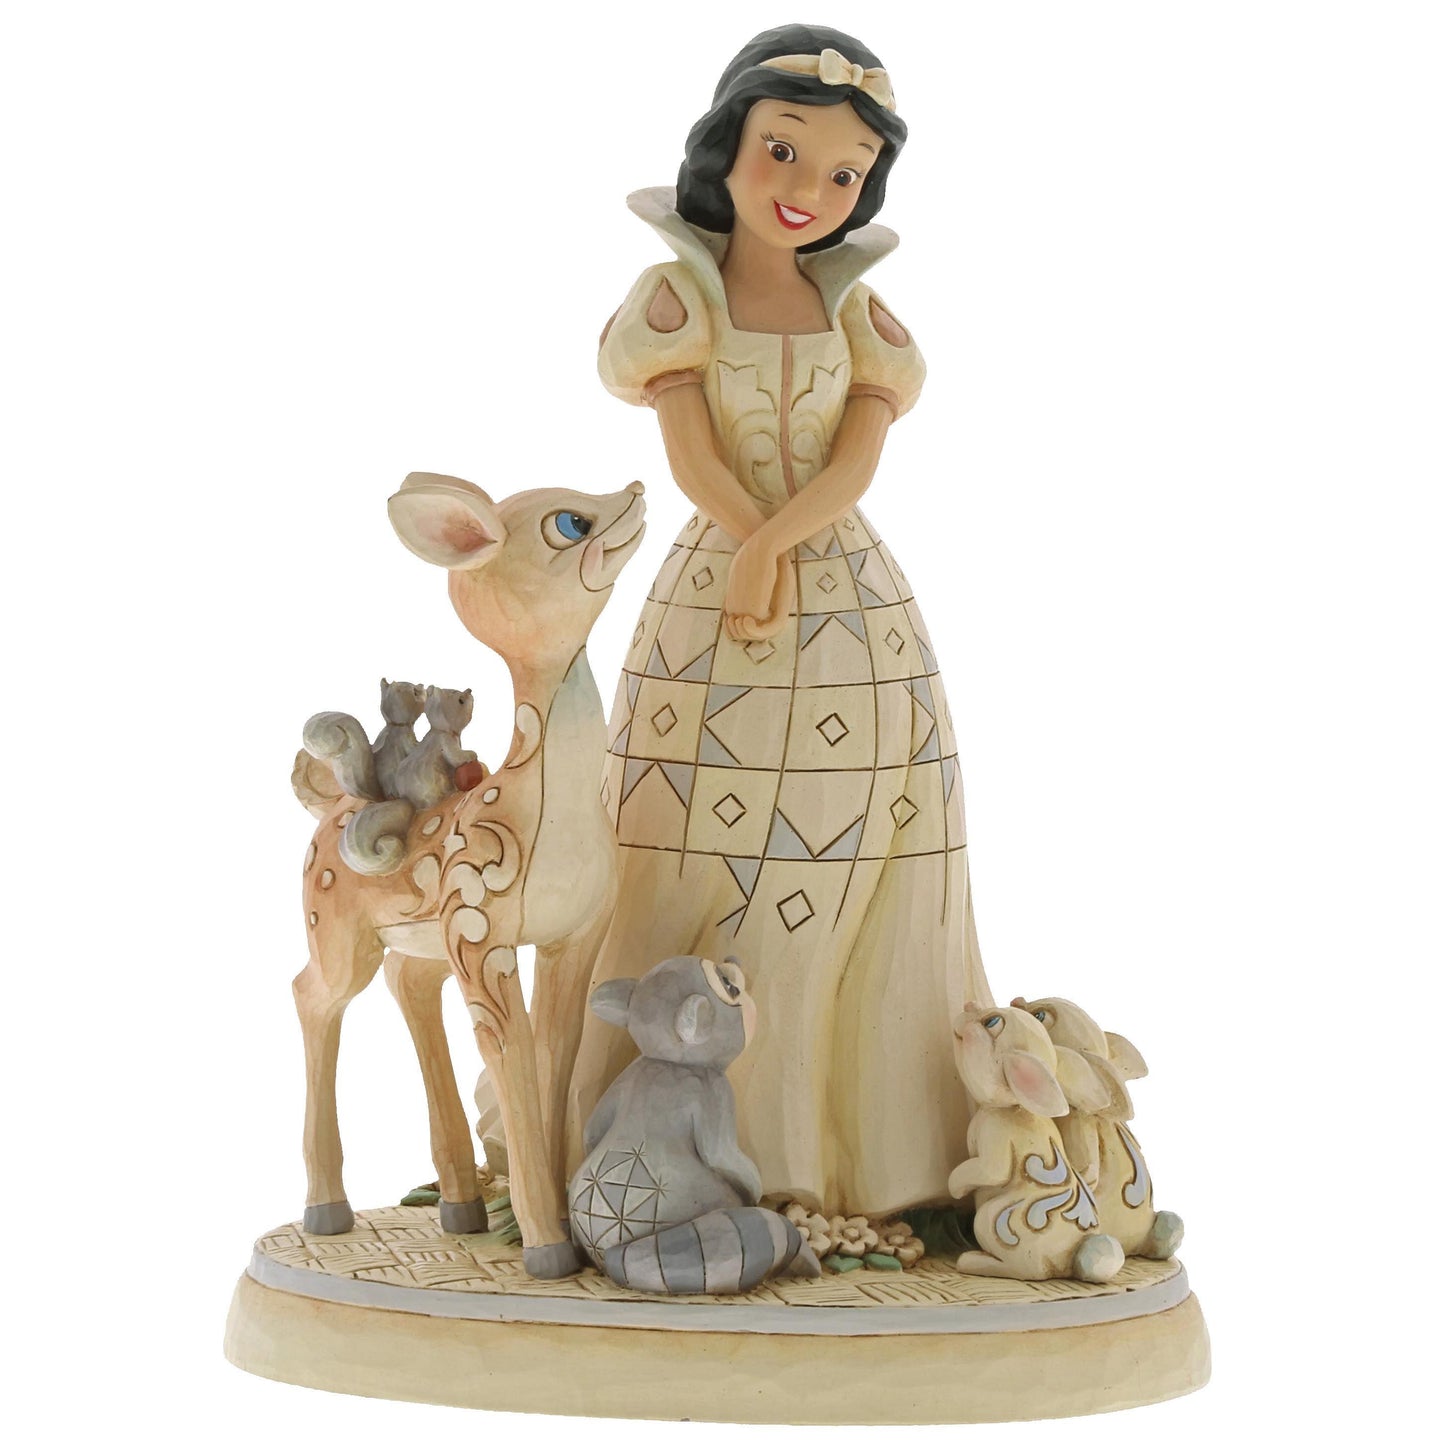 Forest Friends (White Wonderland Snow White Figurine) (Disney Traditions by Jim Shore) - Gallery Gifts Online 